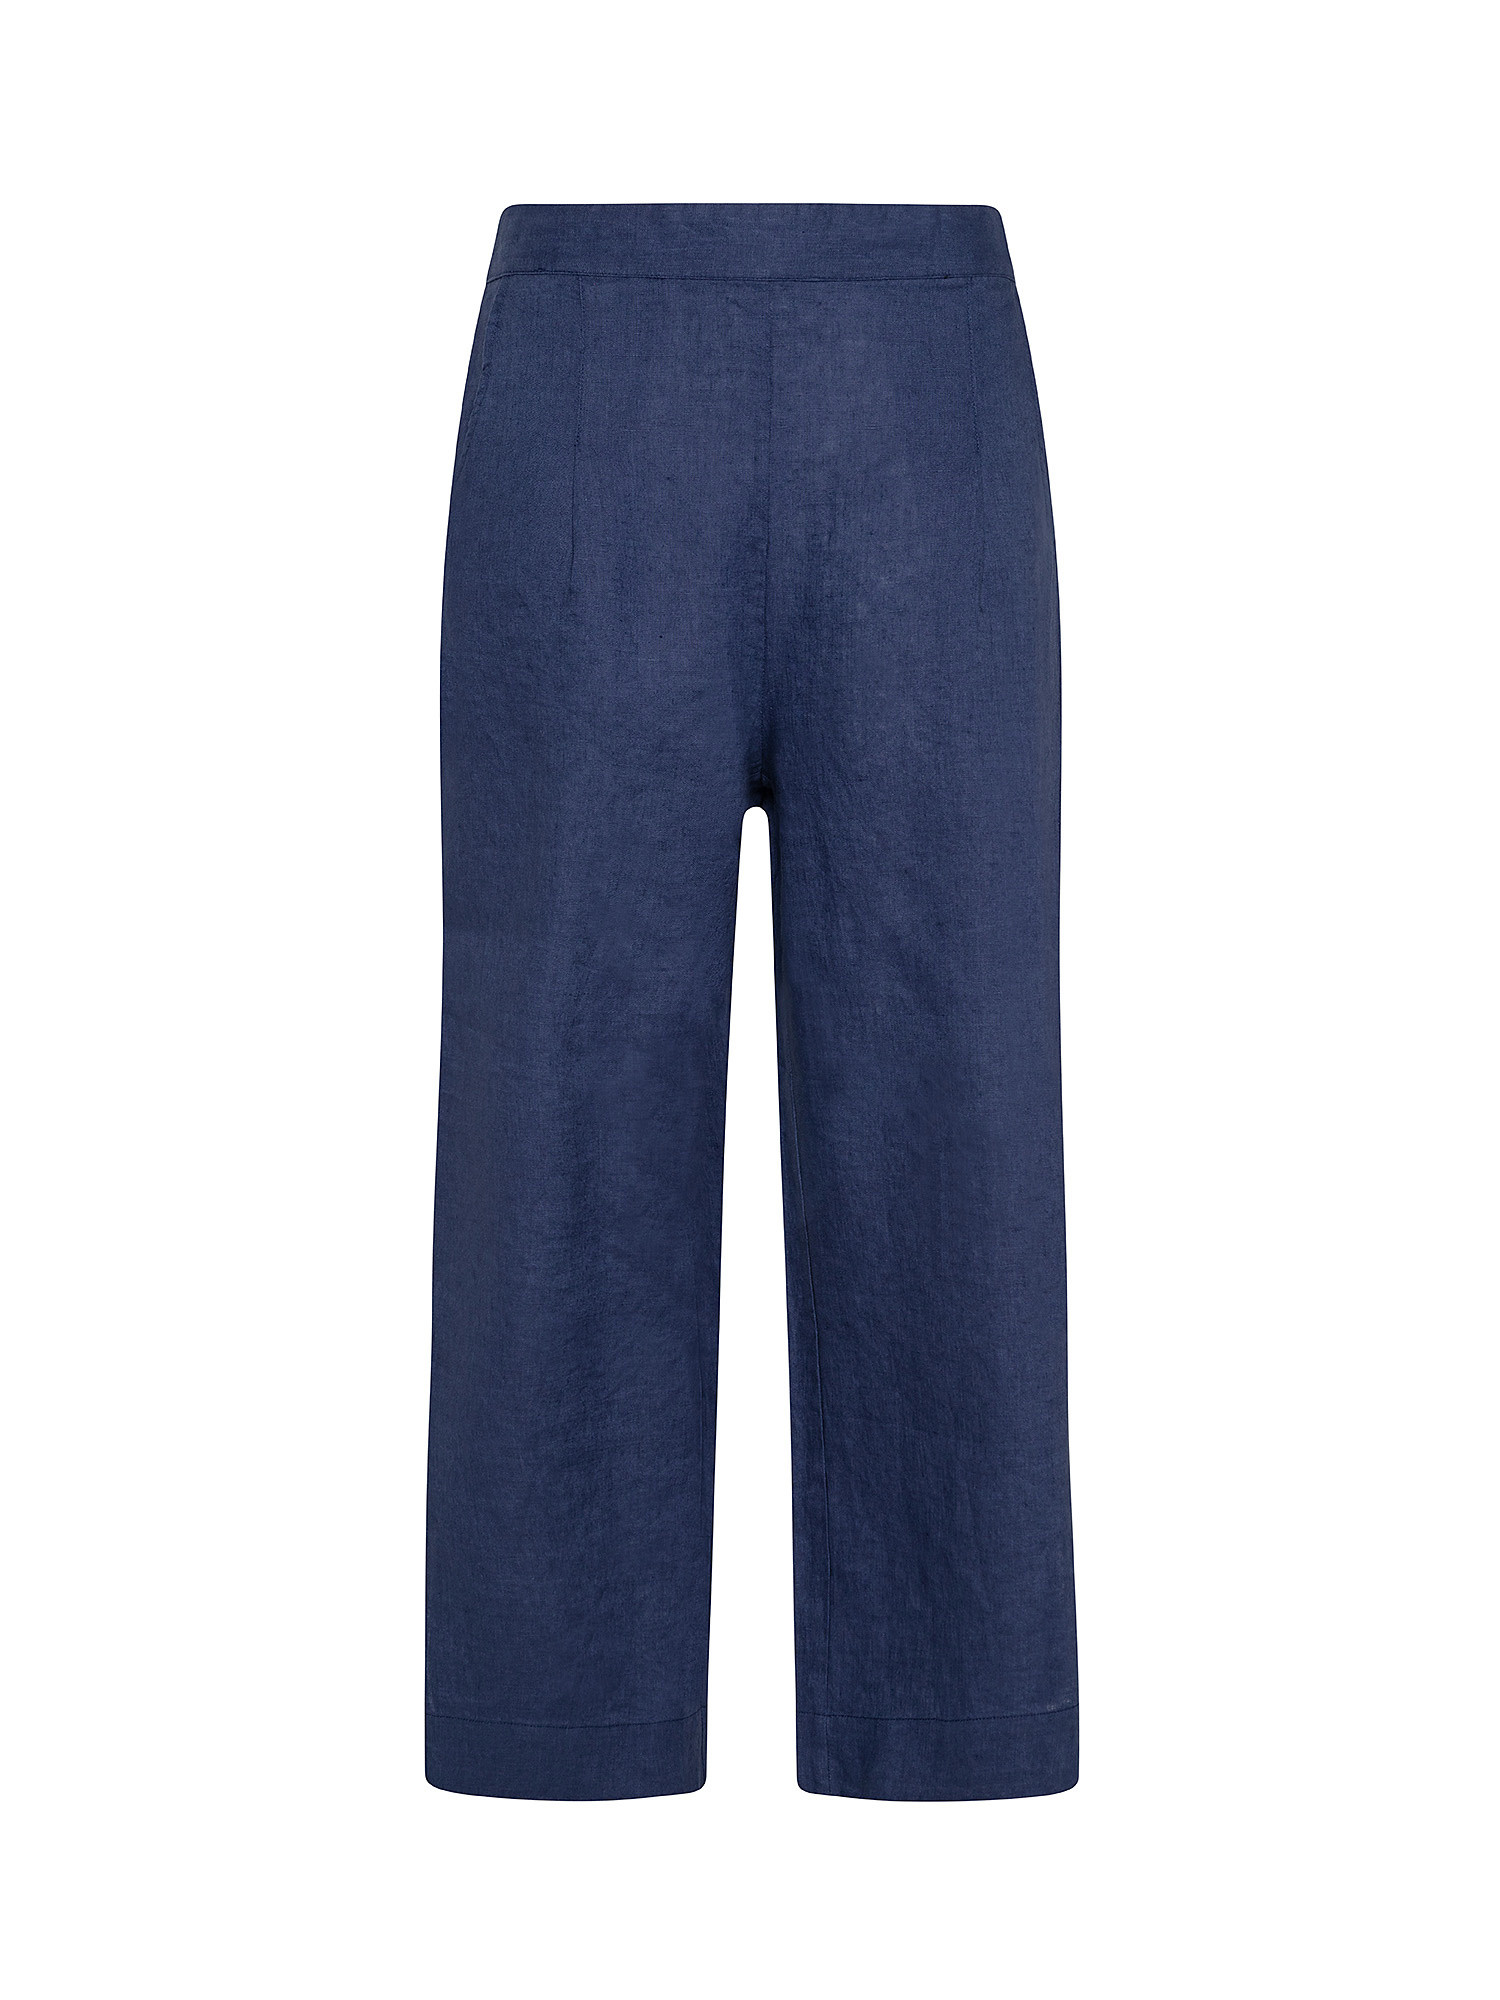 Pure linen trousers with slits, Blue, large image number 0